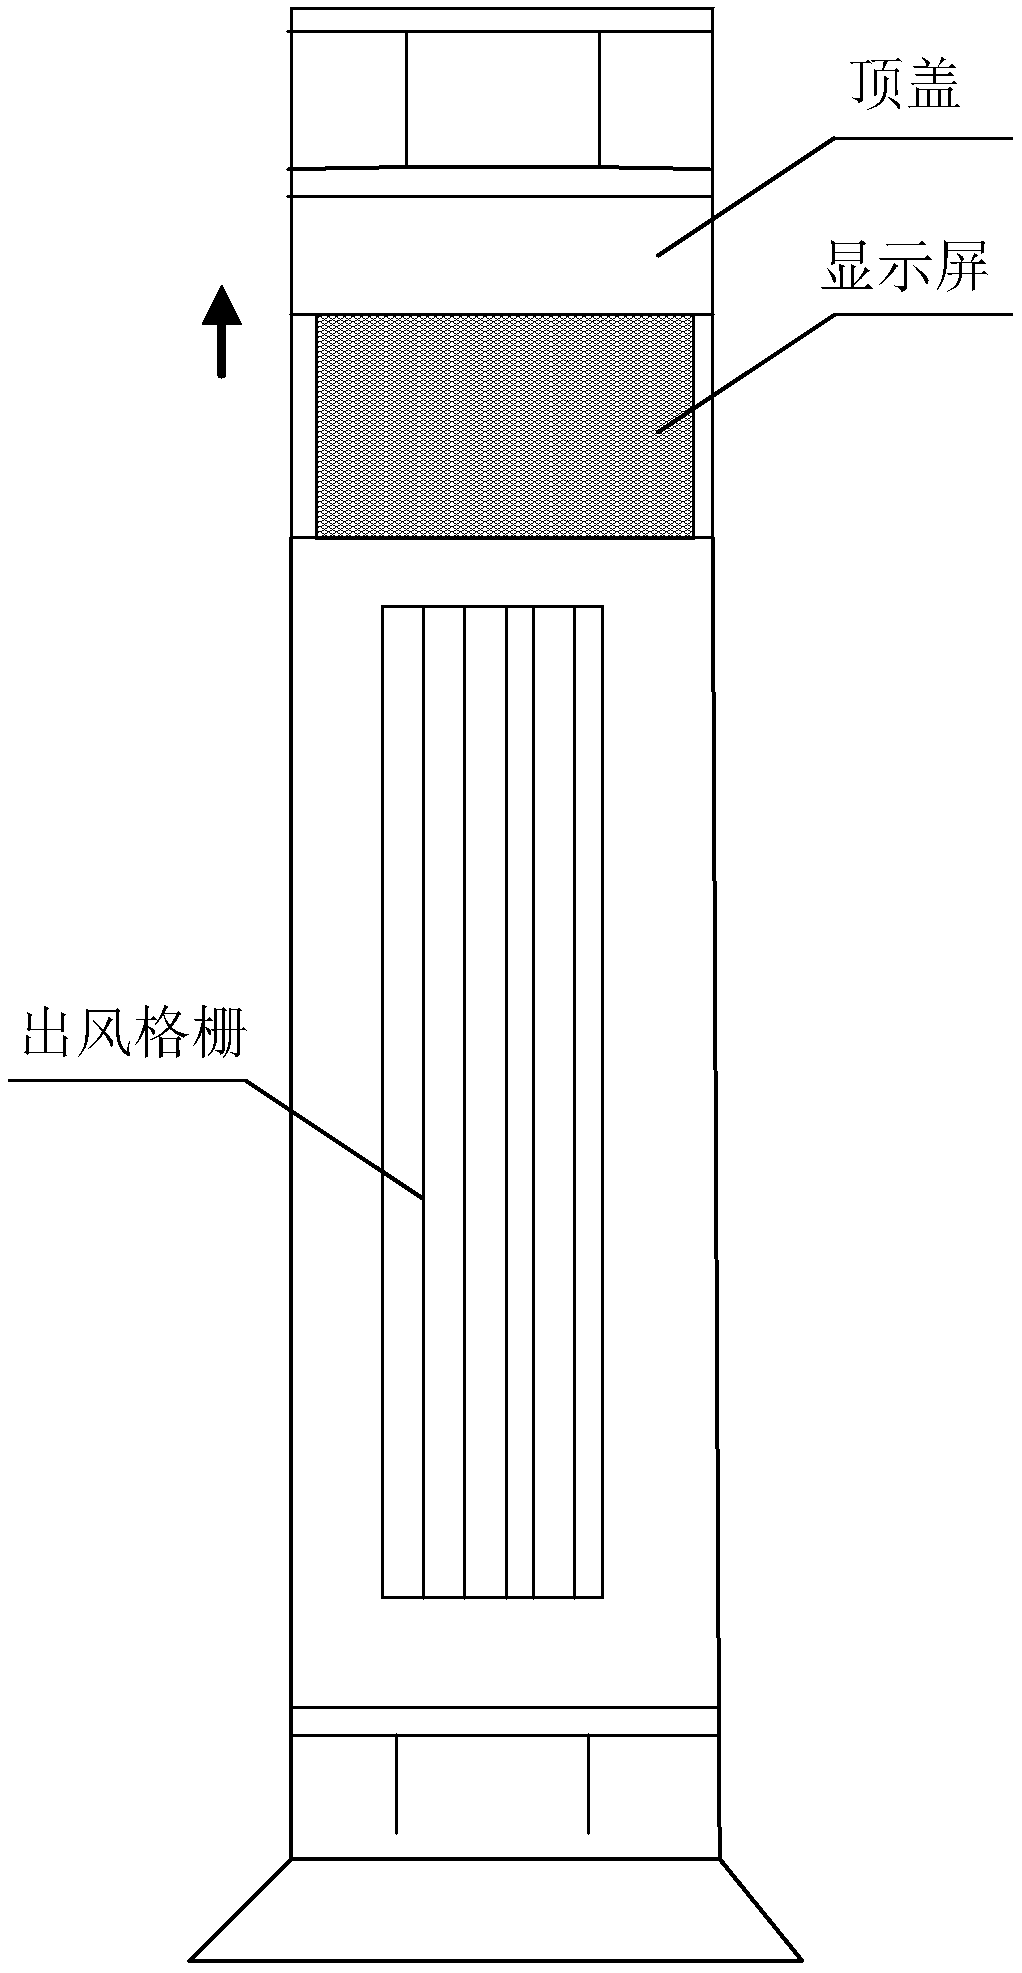 Method, device and system for displaying data and air conditioner